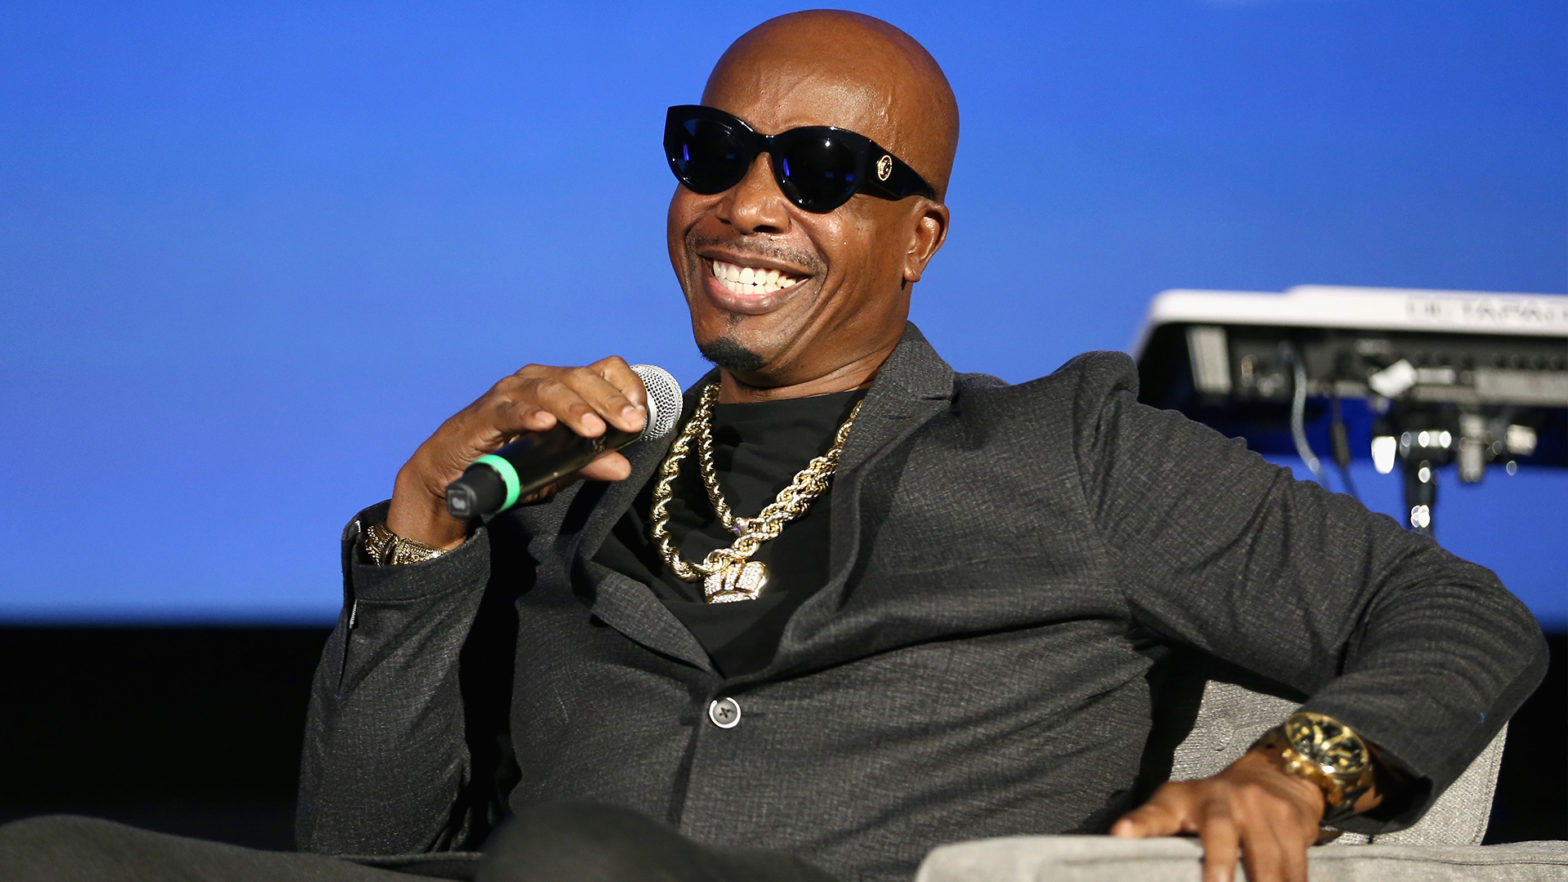 Even Though MC Hammer Ran Through $70M In About Five Years, He Says He 'Wouldn't Change One Thing'